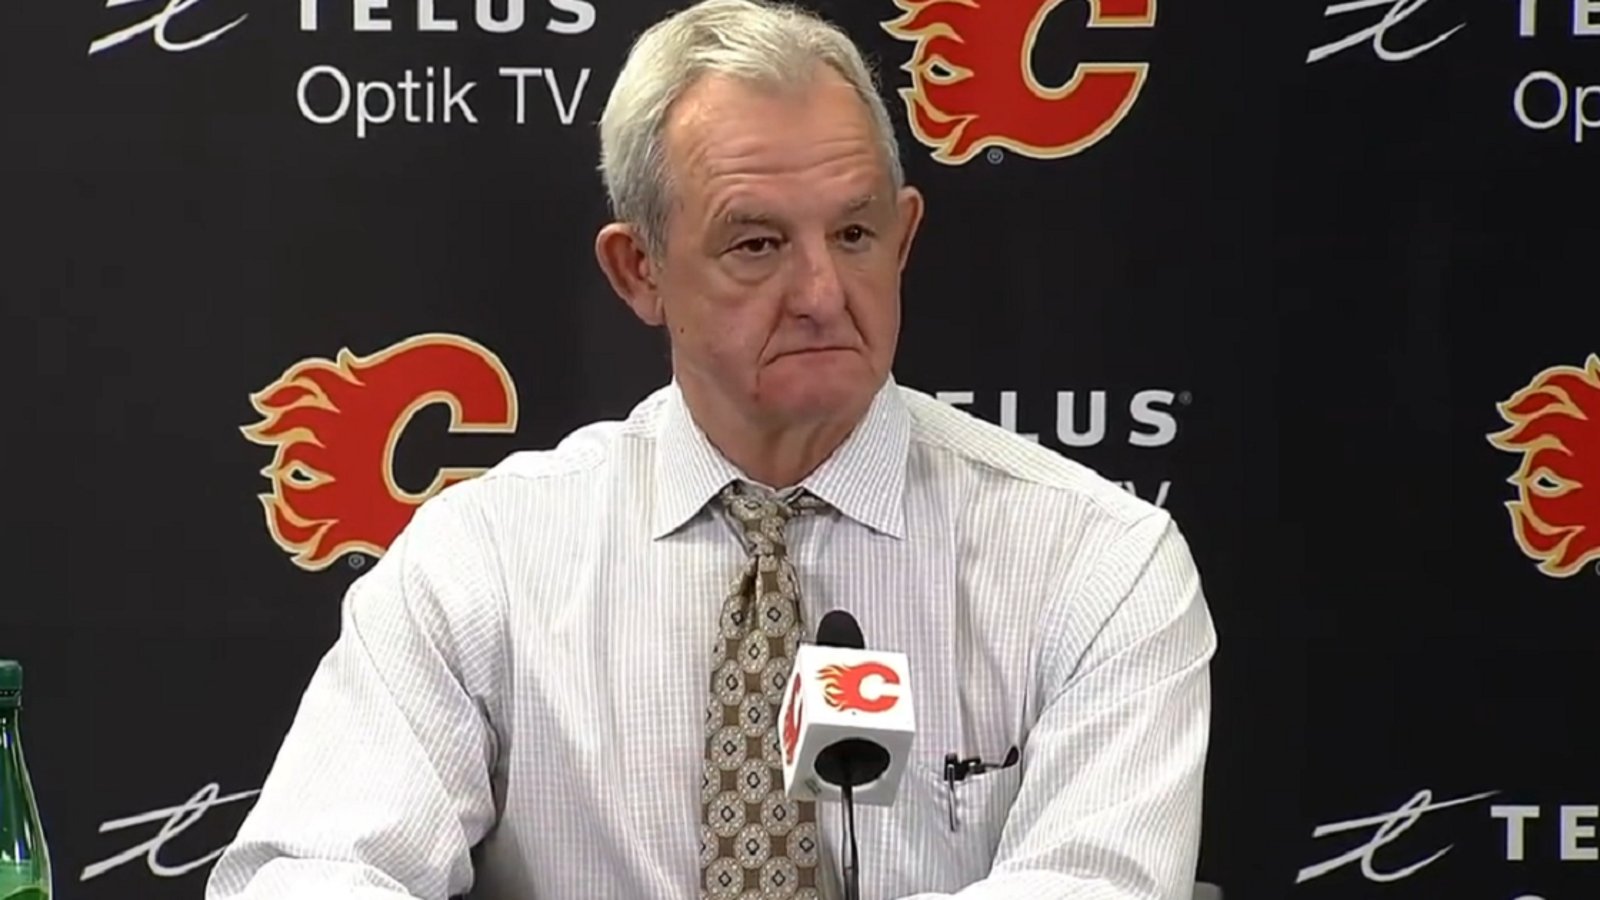 Darryl Sutter criticized for roasting his own player.